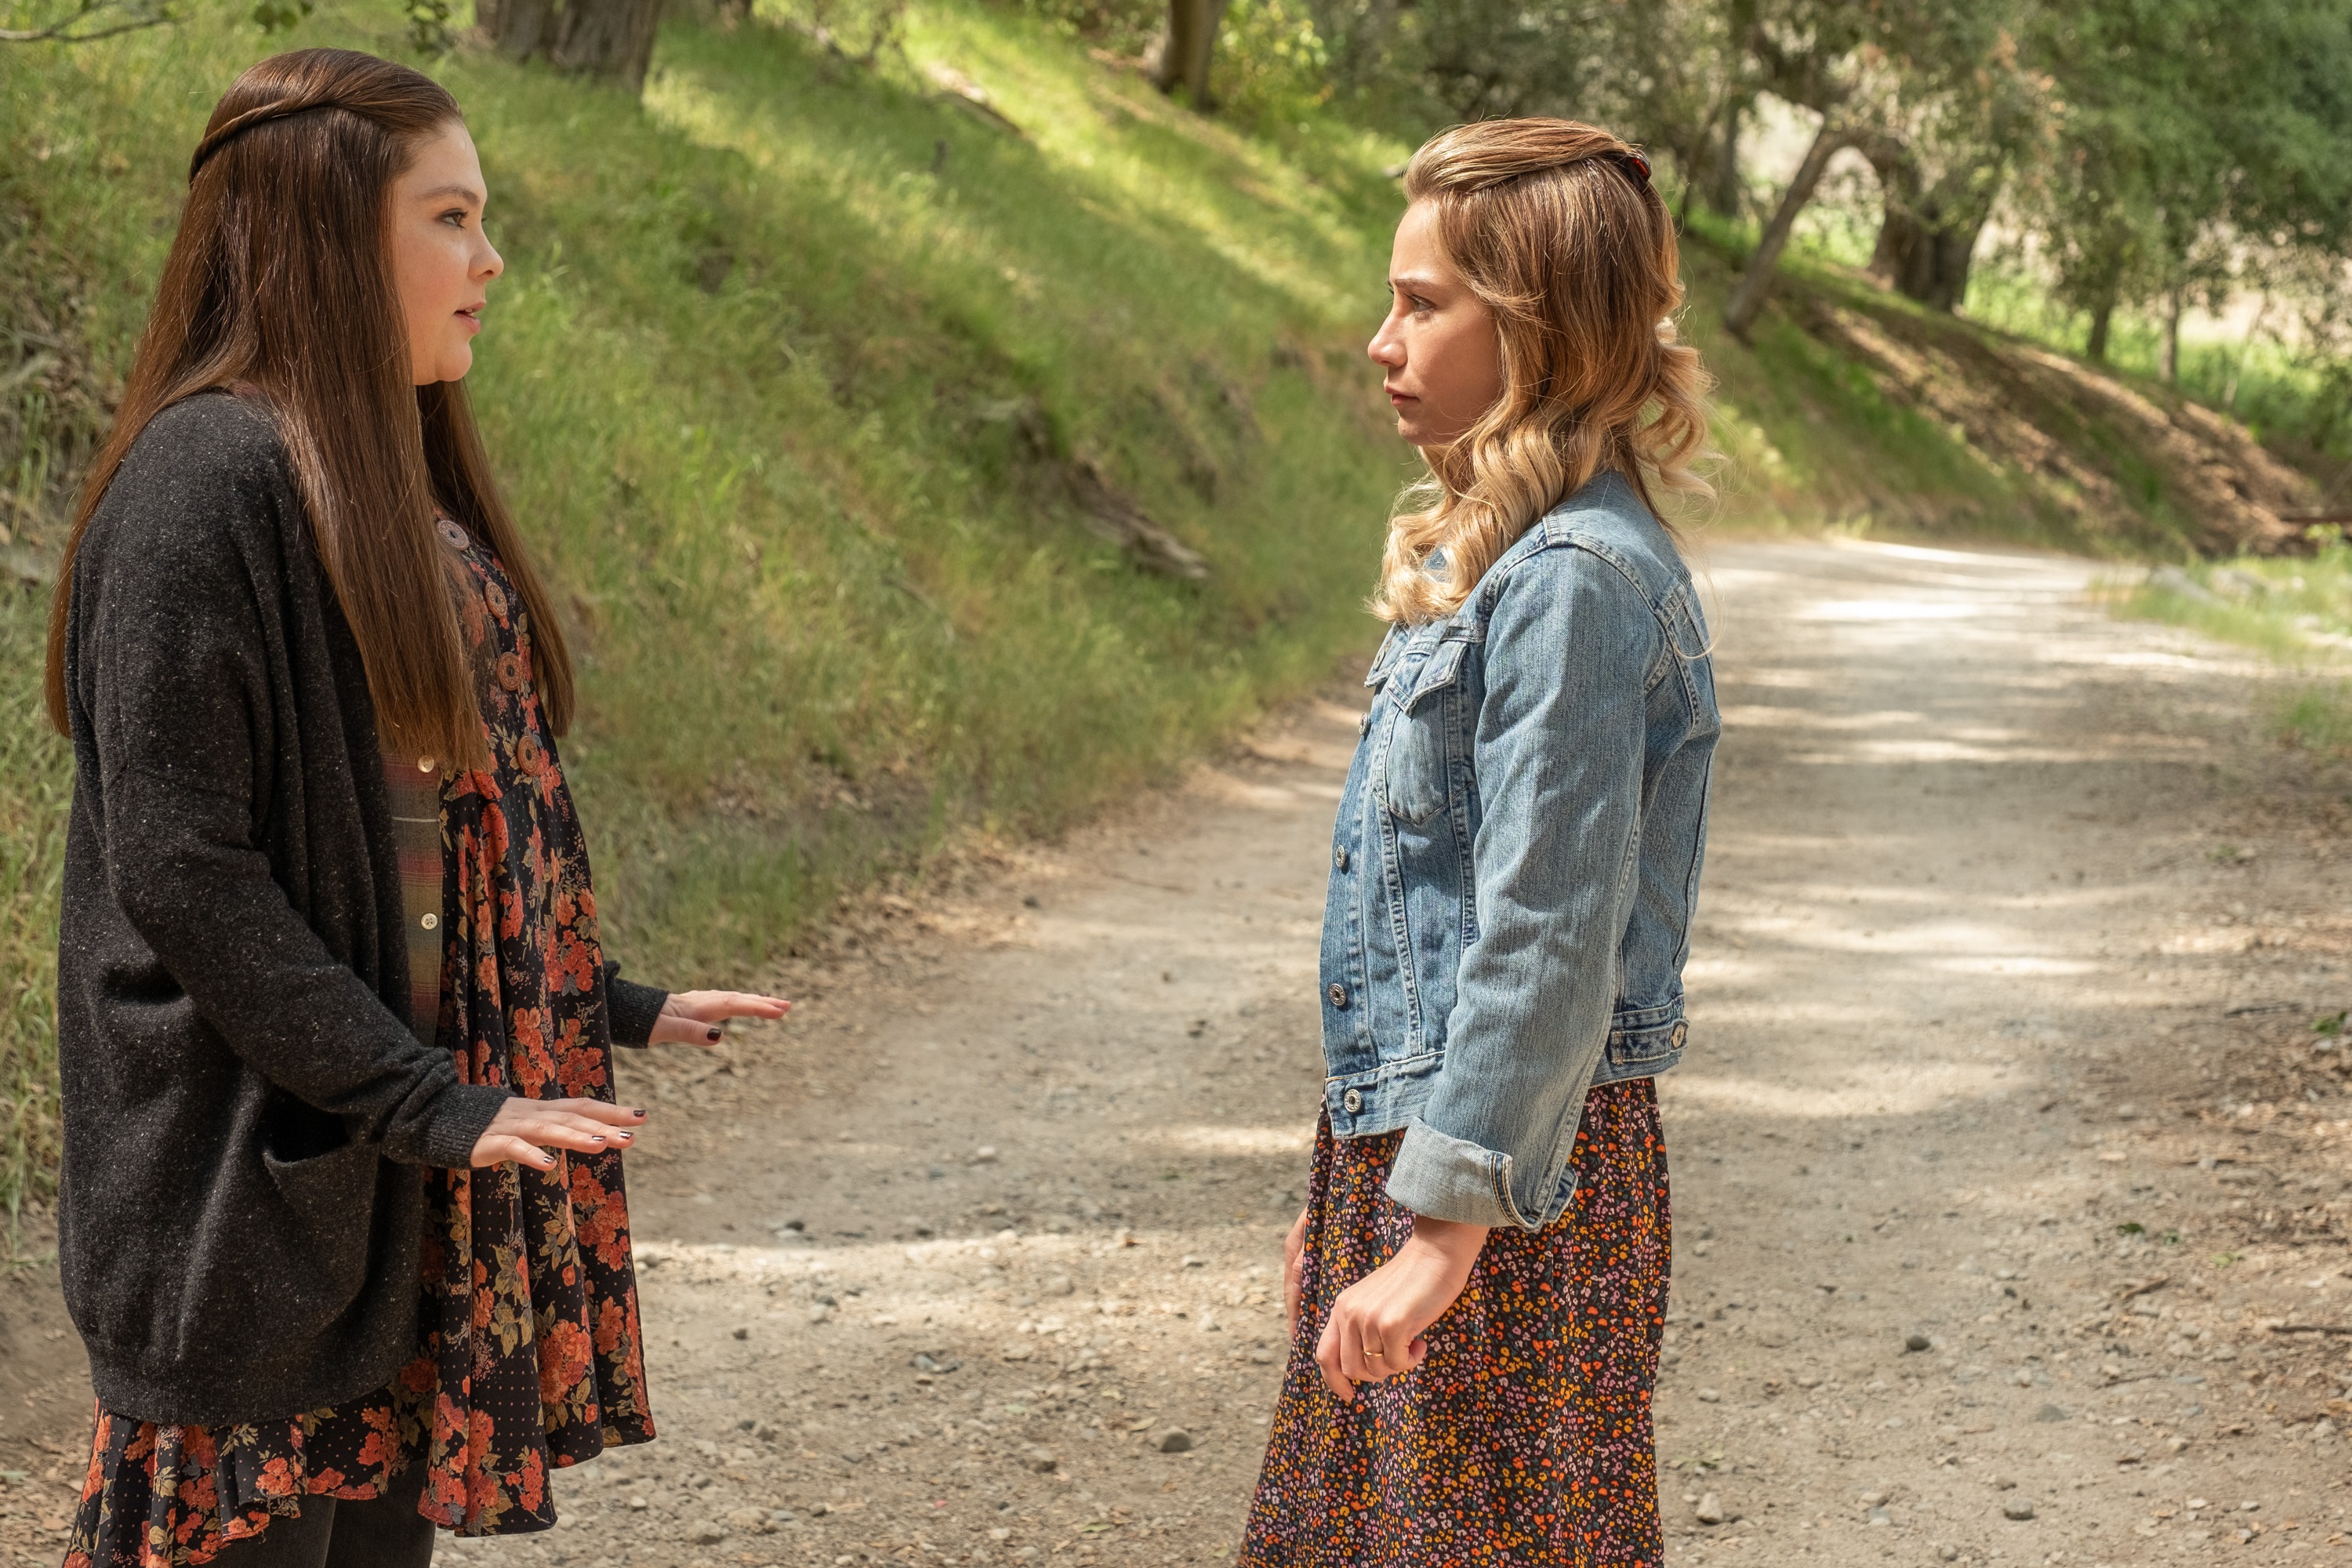 This Is Us Season 5 Episode 15 Hannah Zeile plays young Kate while Amanda Leighton plays young Sophie